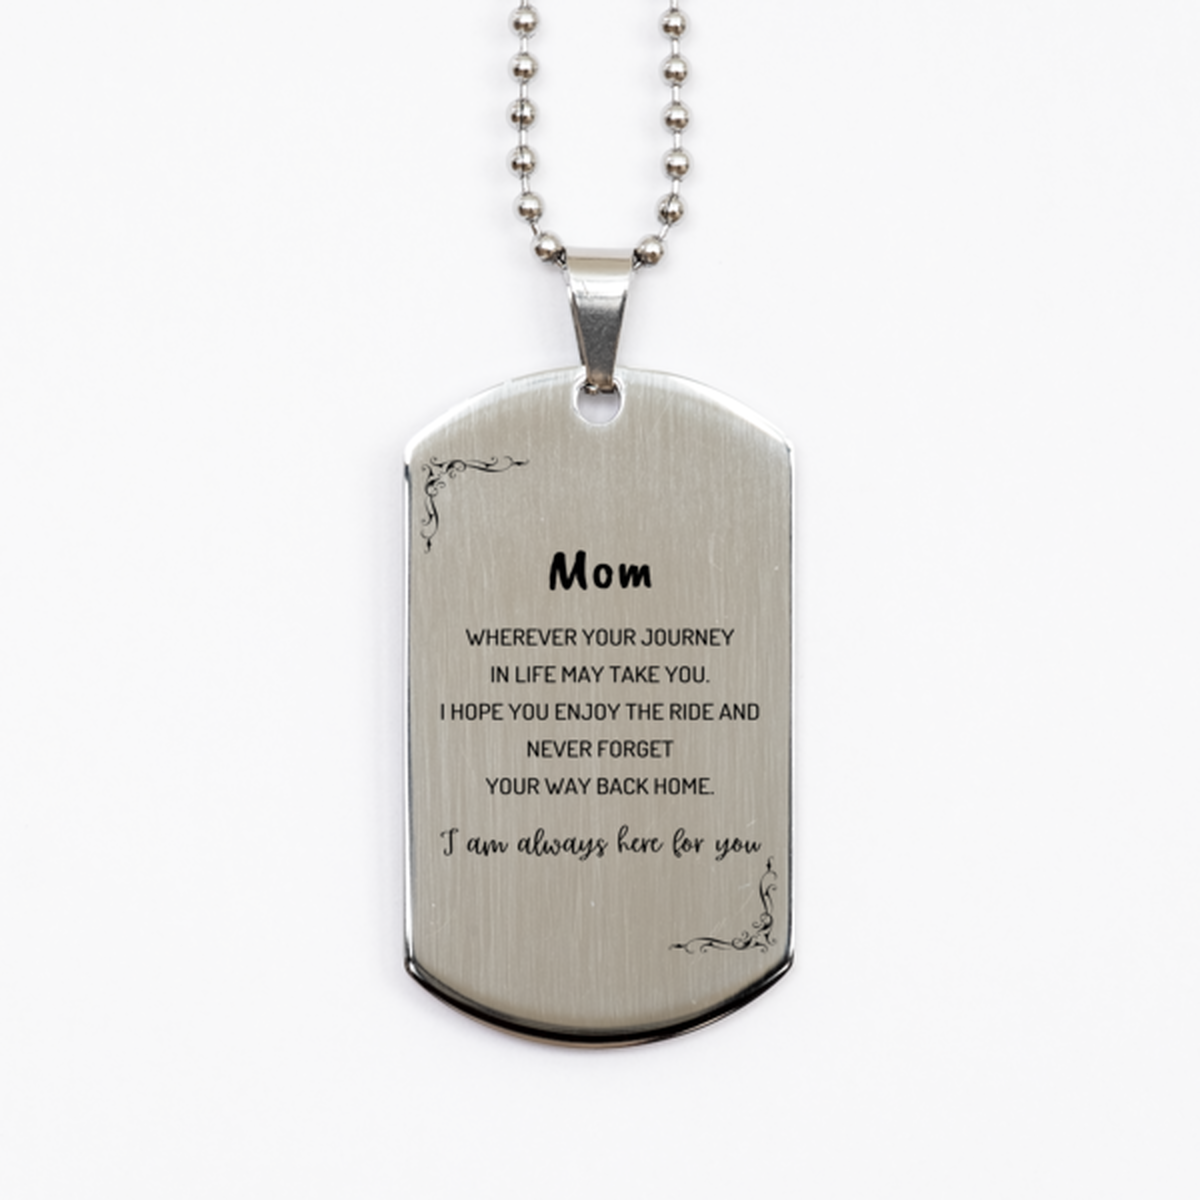 Mom wherever your journey in life may take you, I am always here for you Mom Silver Dog Tag, Awesome Christmas Gifts For Mom, Mom Birthday Gifts for Men Women Family Loved One